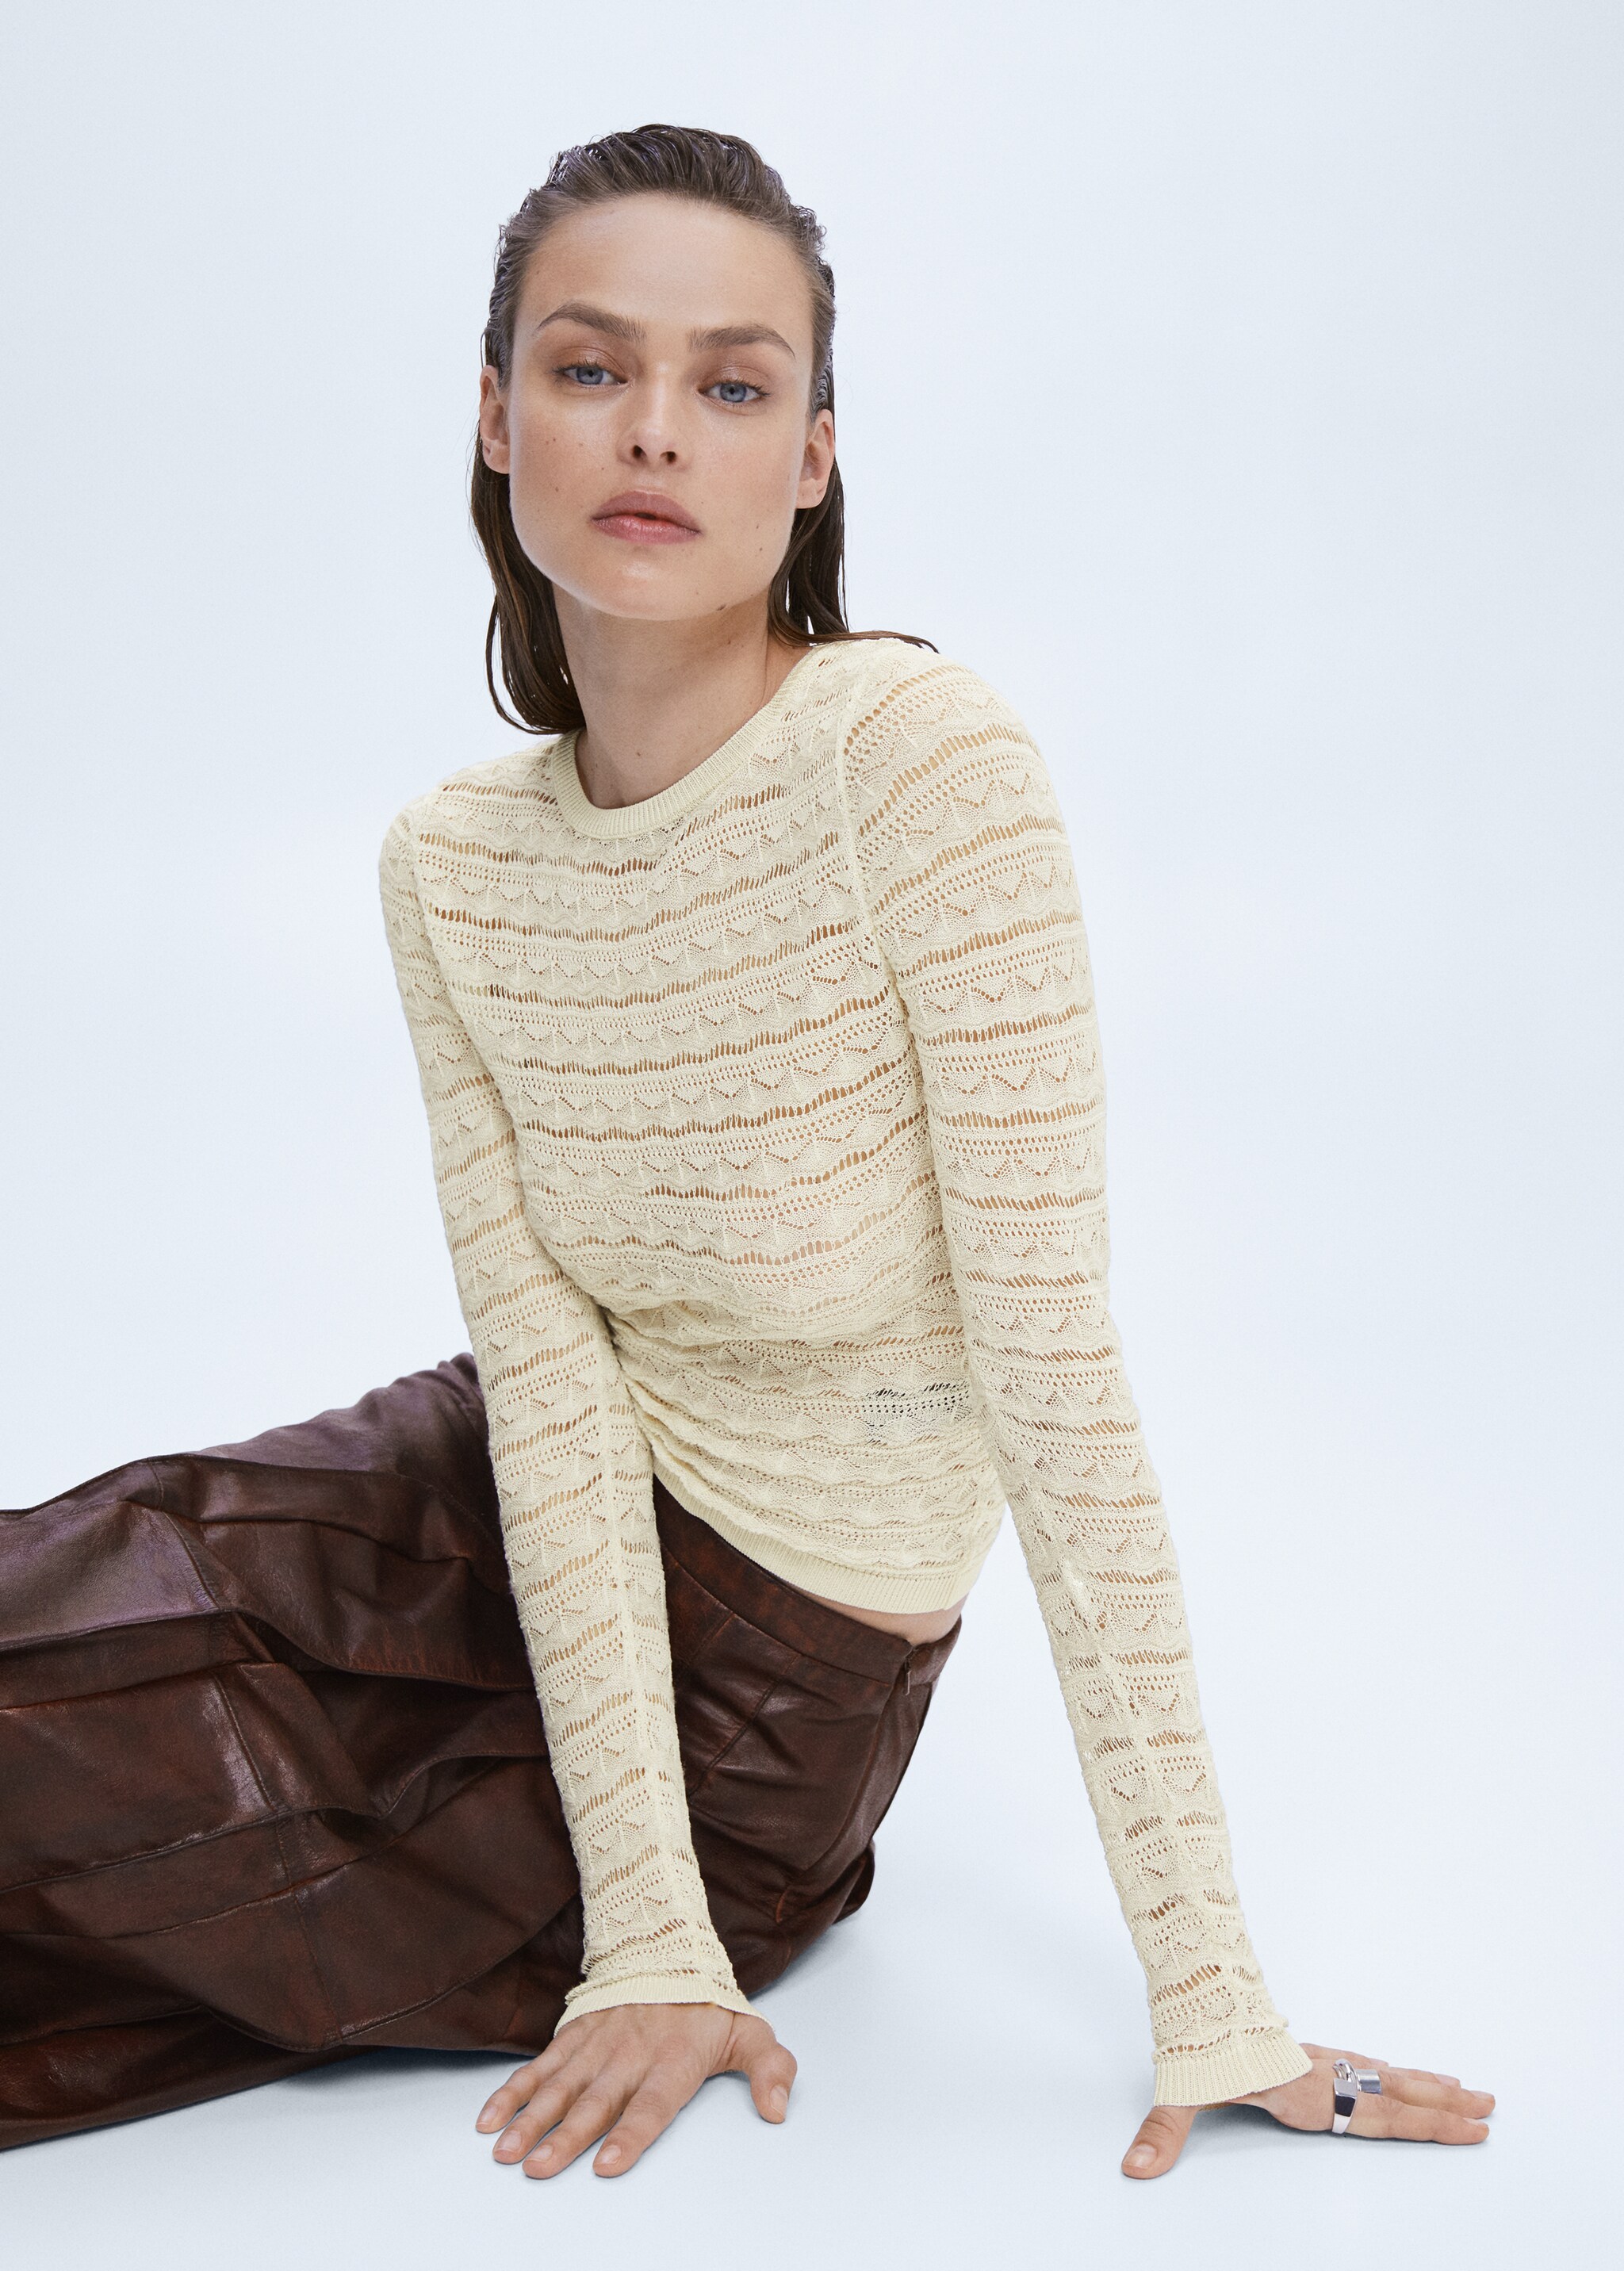 Openwork knit sweater - Details of the article 2